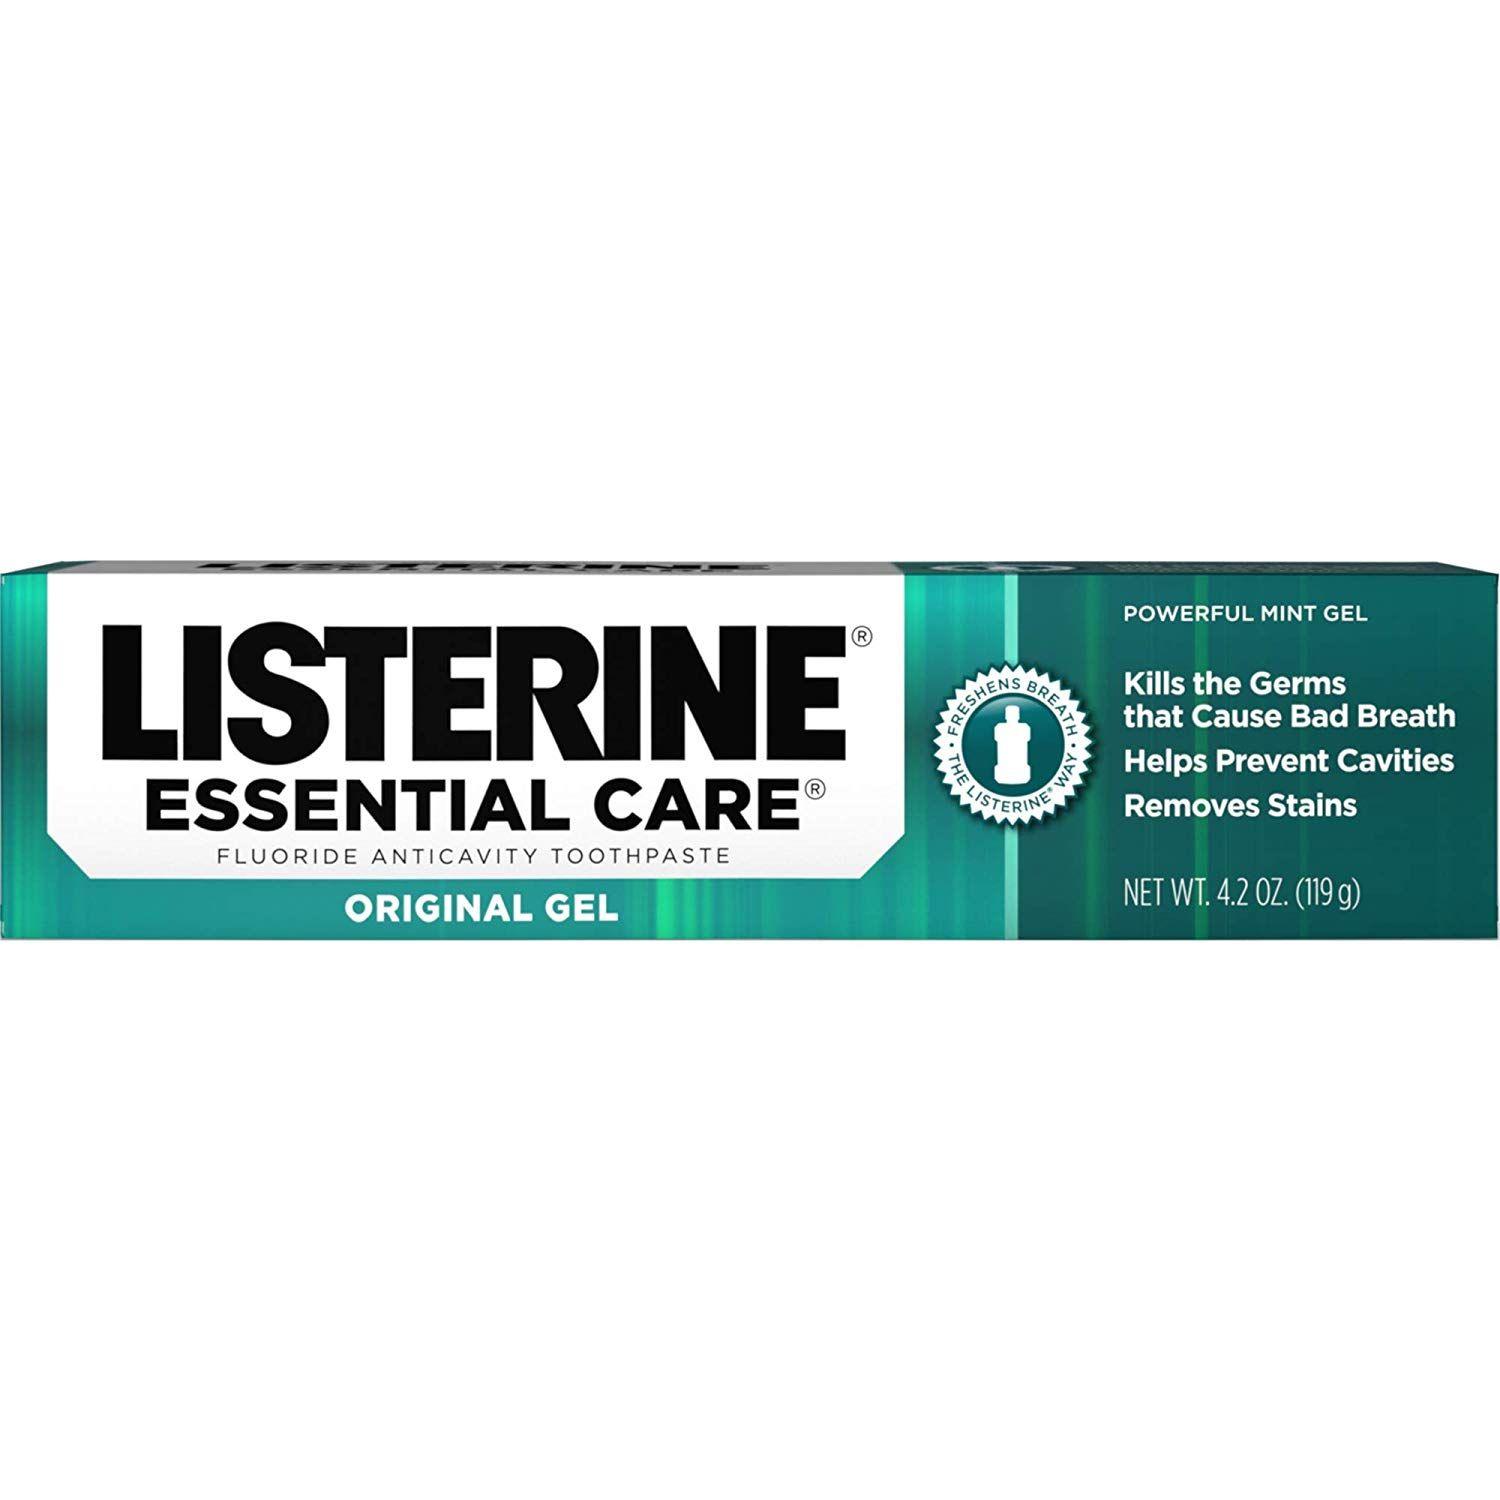 Listerine Logo - Listerine Essential Care Fluoride Anticavity Toothpaste Gel, 4.2 Ounce,  (Pack of 3)